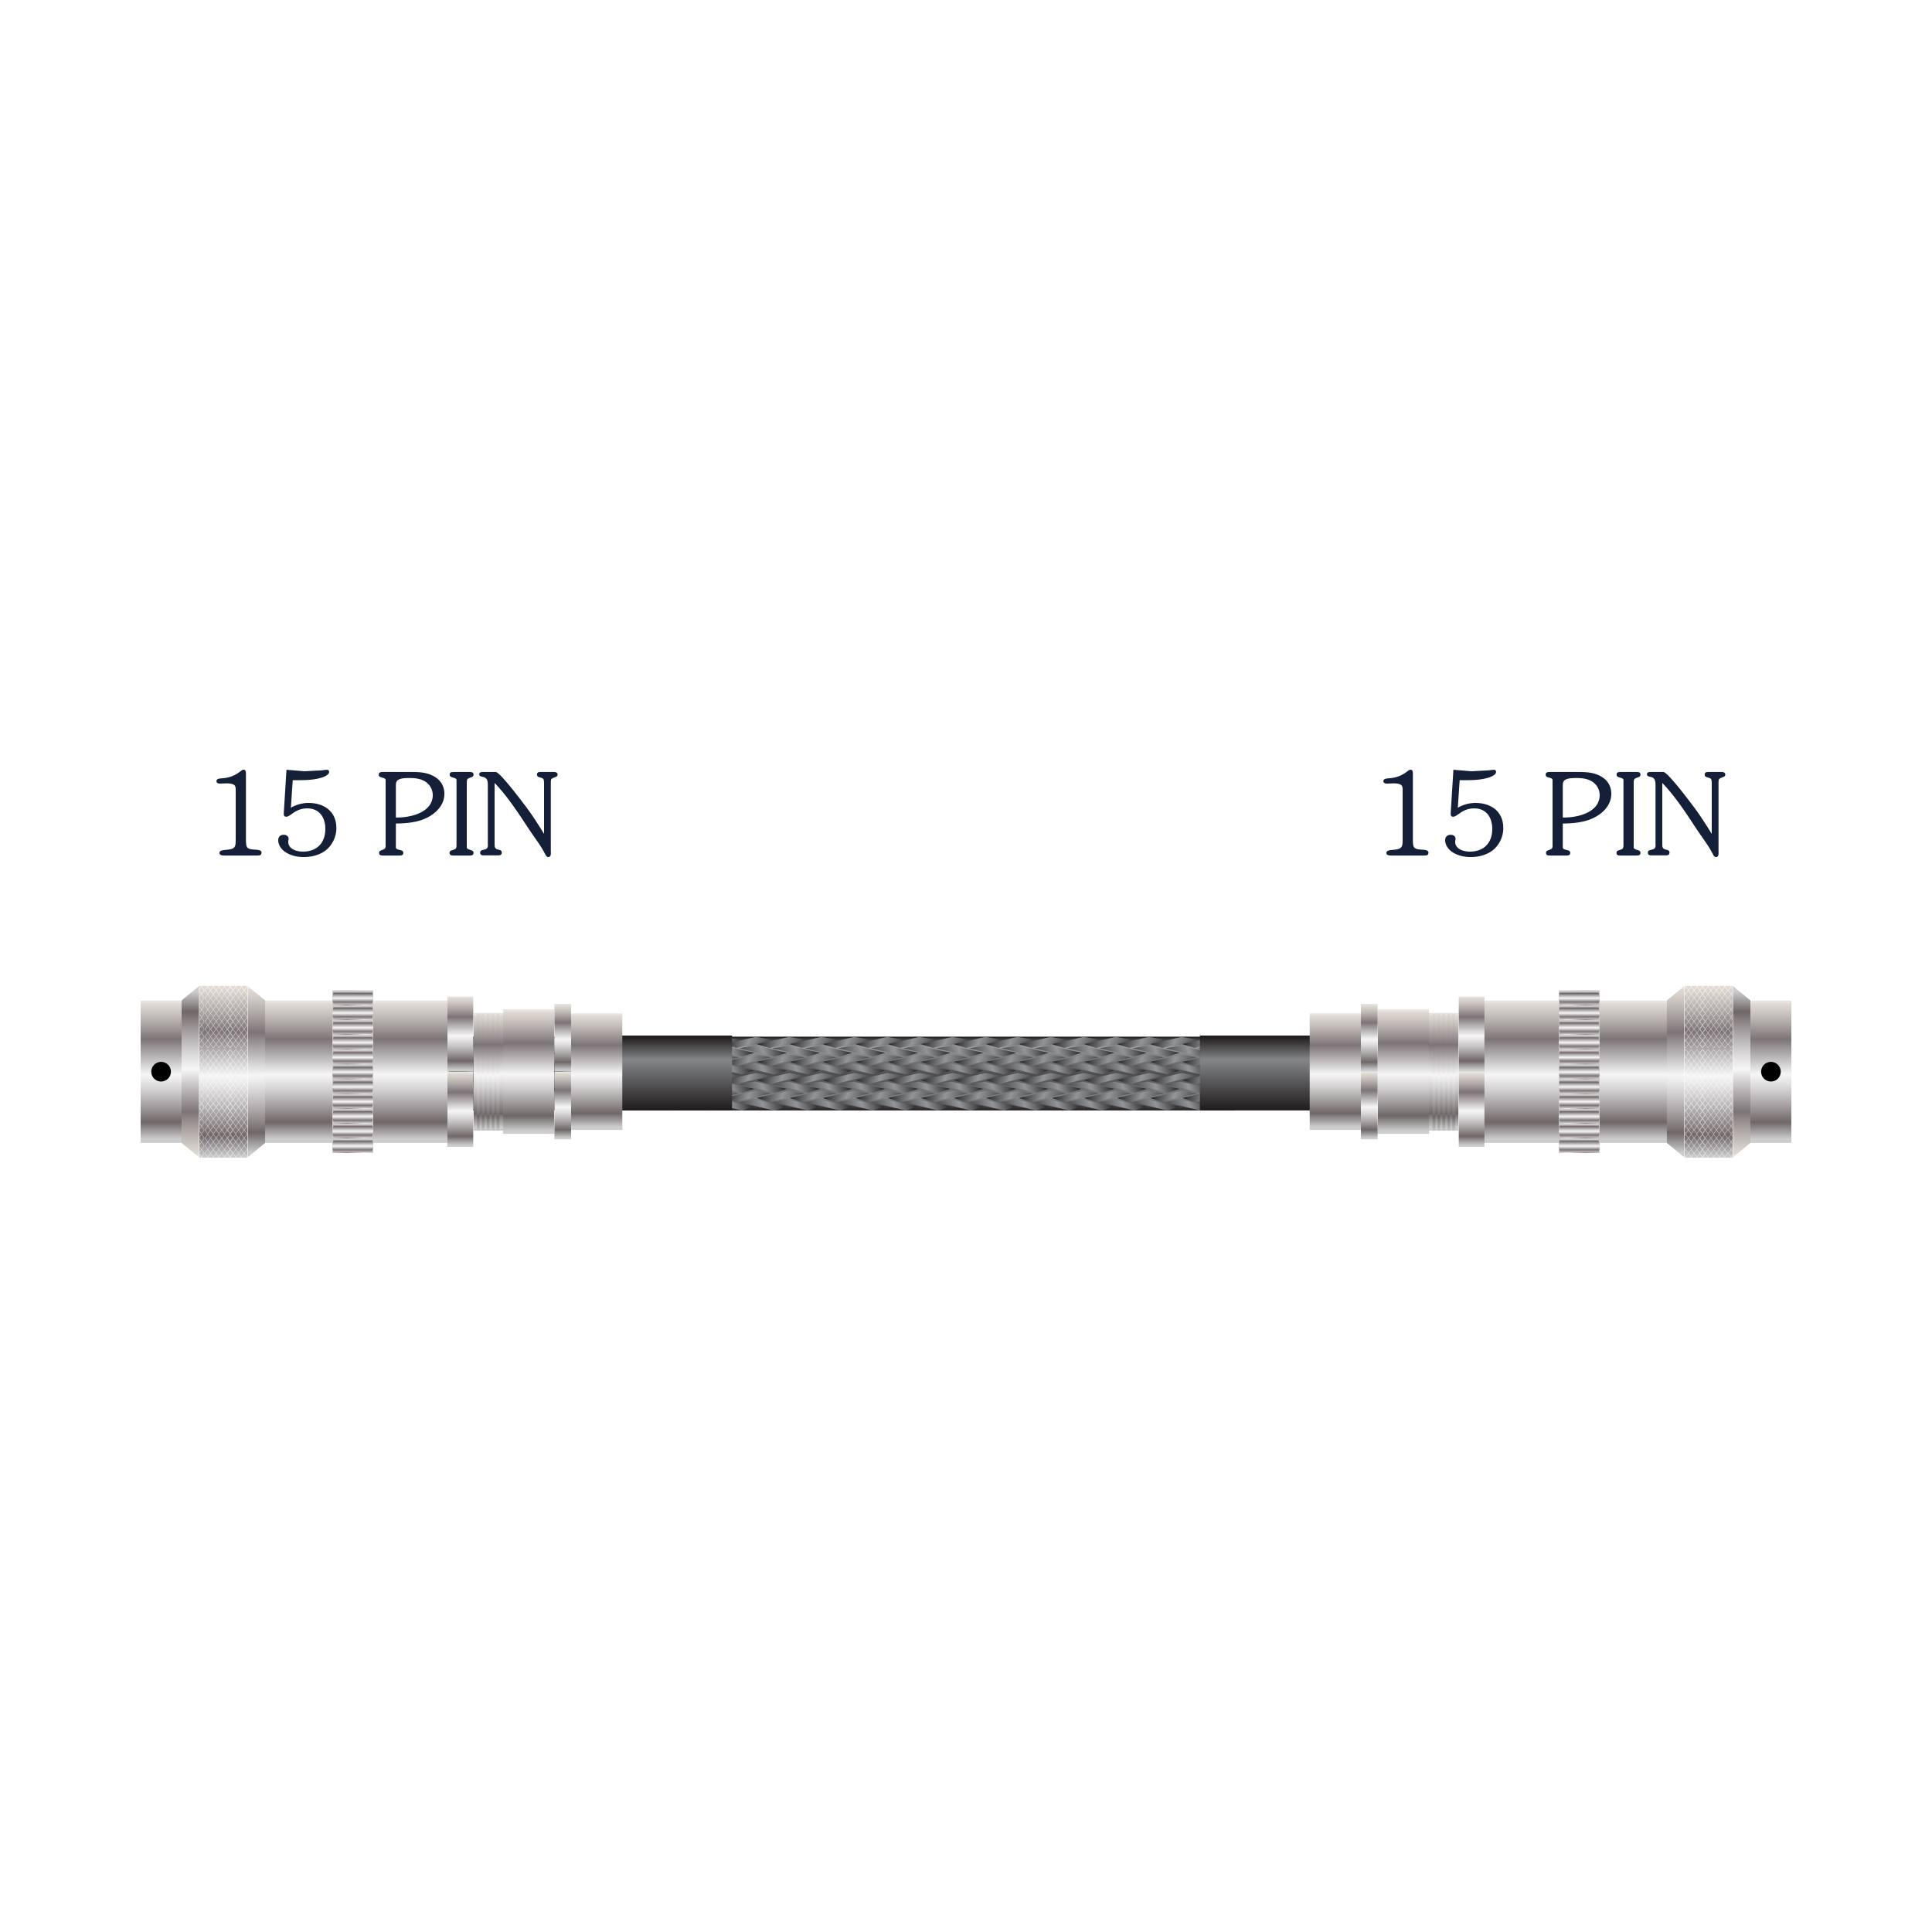 <p align="center">Tyr 2 Specialty 15 Pin Cable</p>